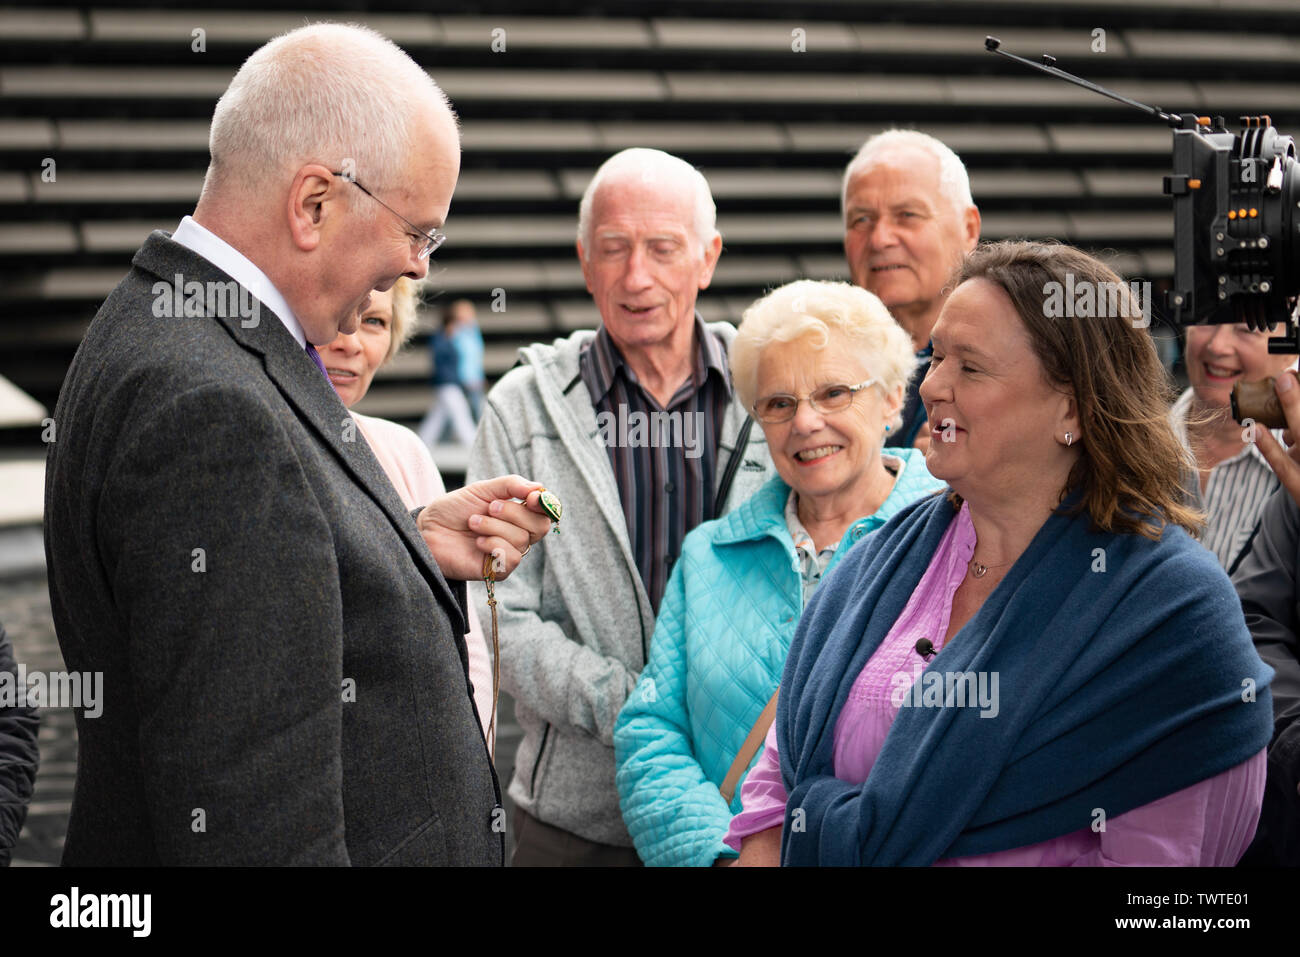 Dundee, Scotland, UK. 23 June 2019. The BBC Antiques Roadshow TV programme is aiming on location t the new V&A Museum in Dundee today. Long queues formed as members of the public arrived with their collectables to have them appraised and valued by the Antiques Roadshow experts. Select items and their owners were chosen to be filmed for the show. Pictured, Expert Geoffrey Munn discussing valuable jewellery with an owner. Credit: Iain Masterton/Alamy Live News Stock Photo